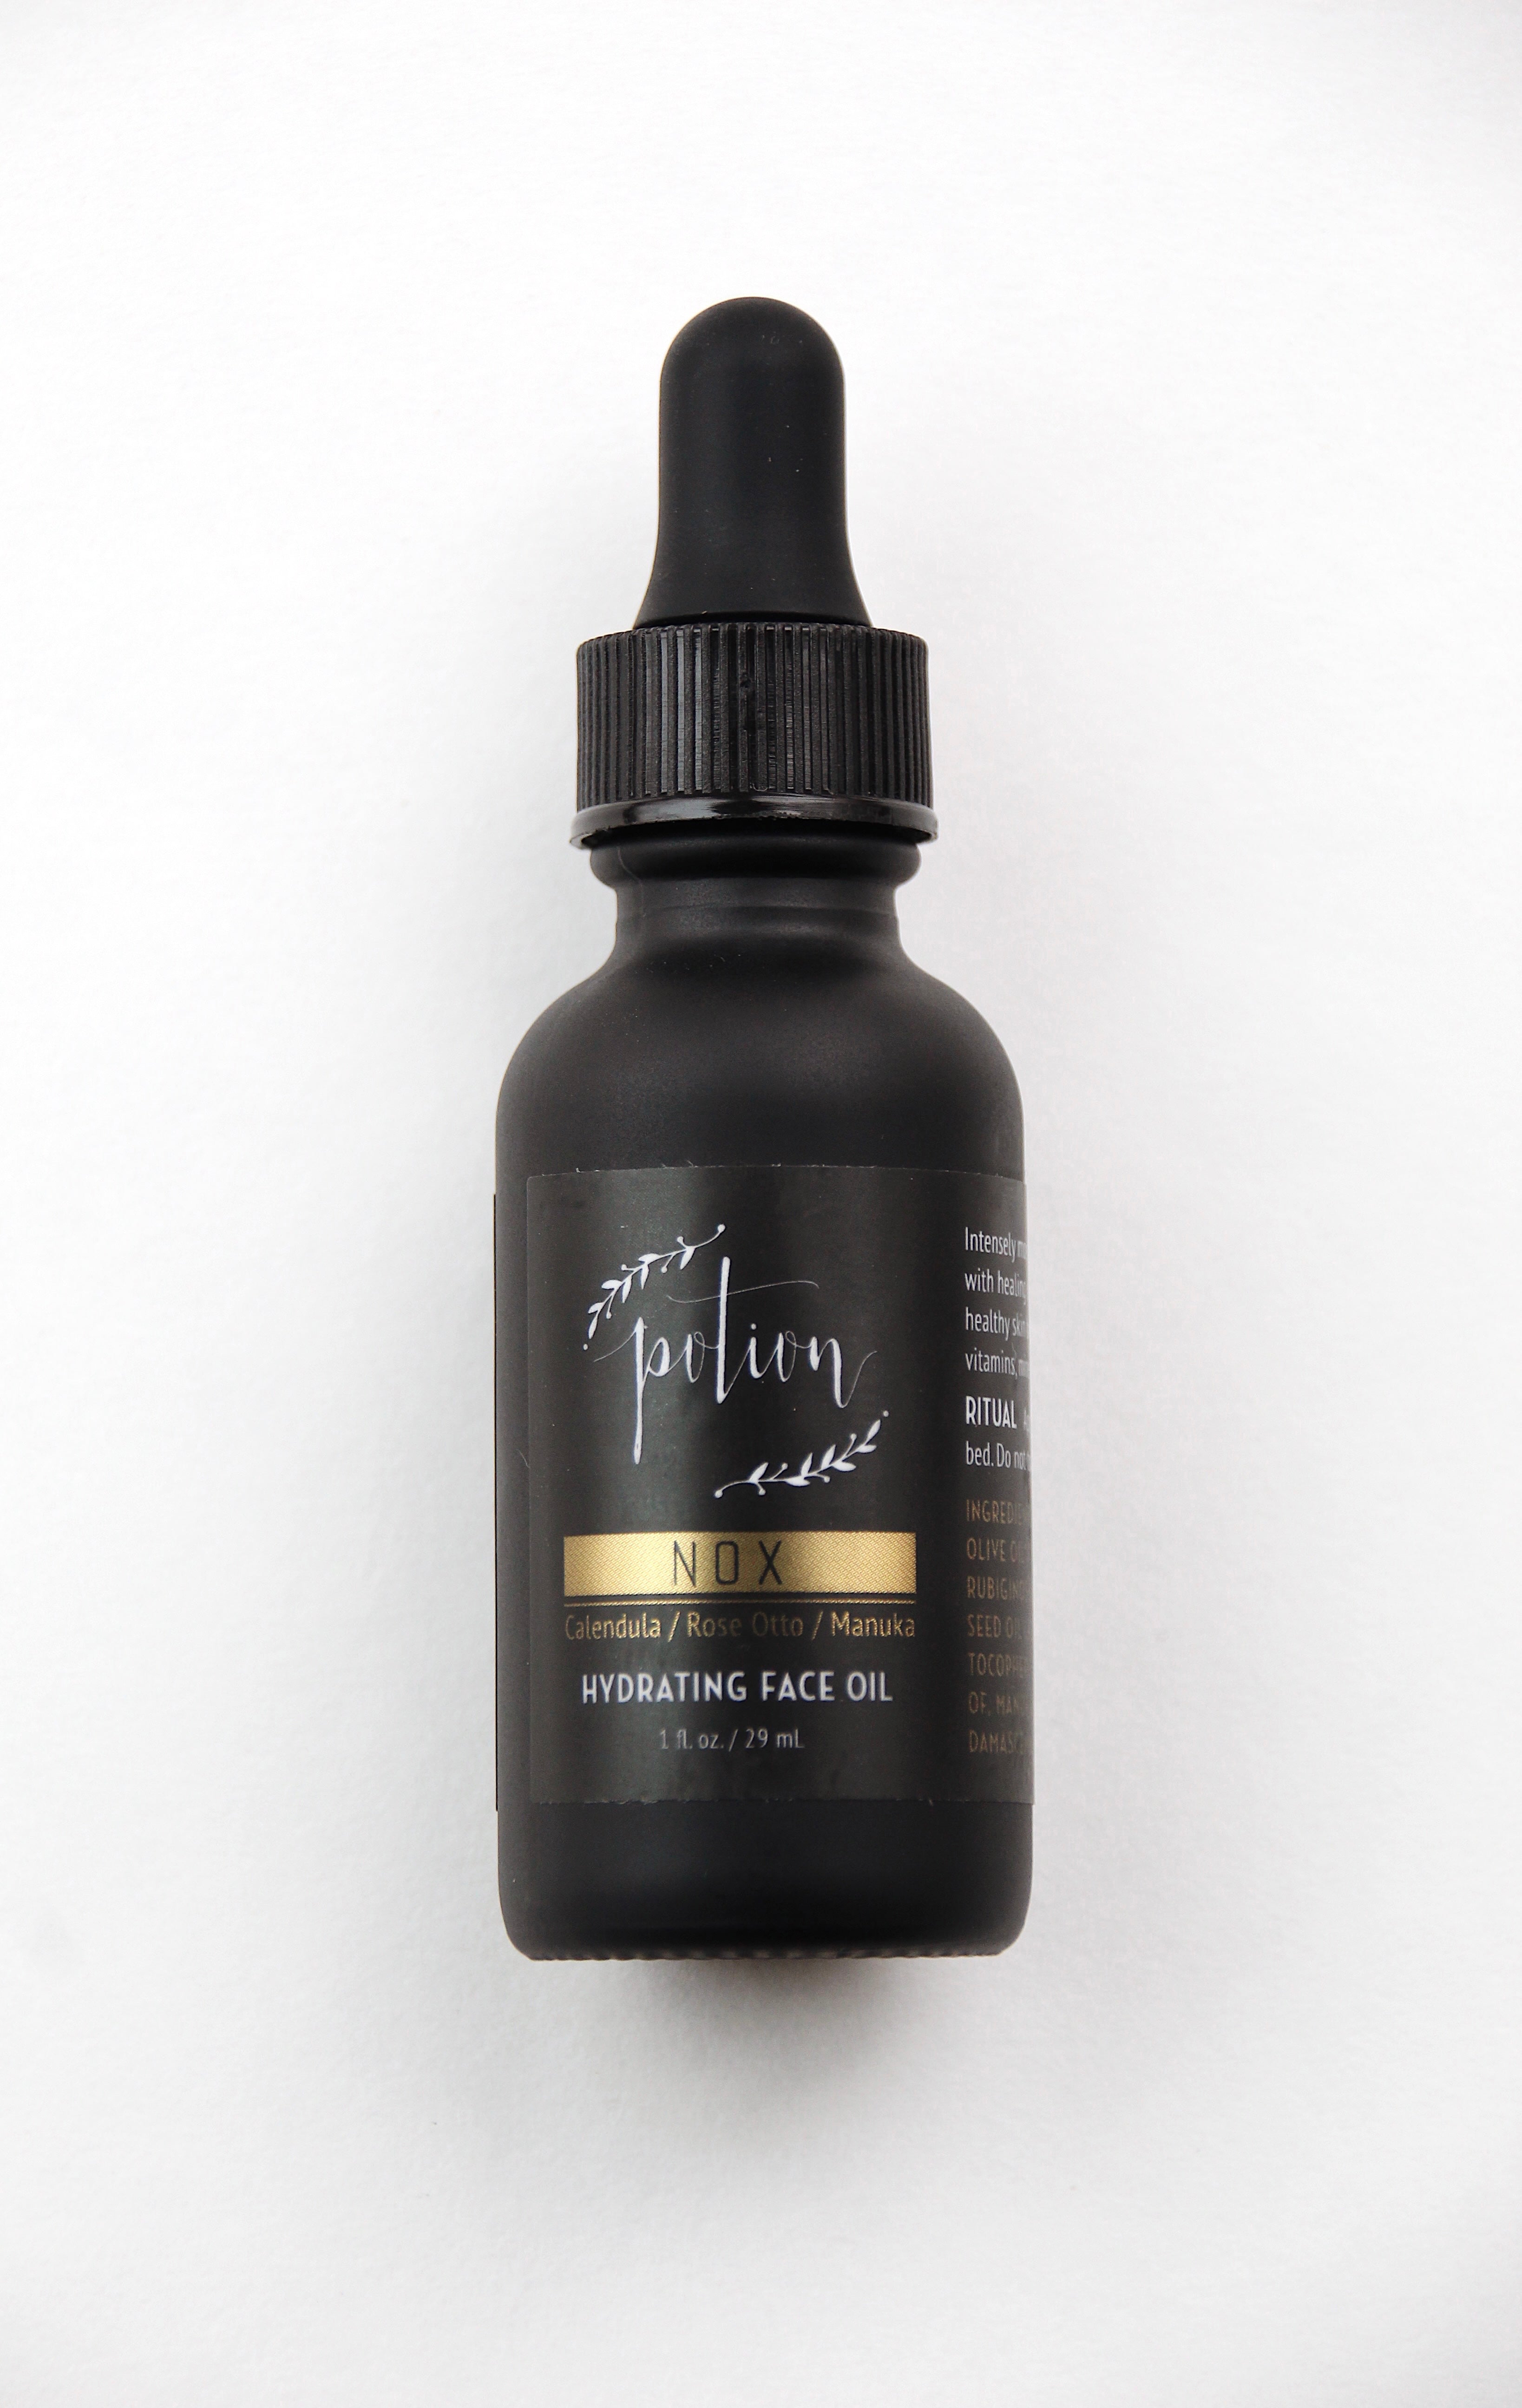 Nox Hydrating Face Oil